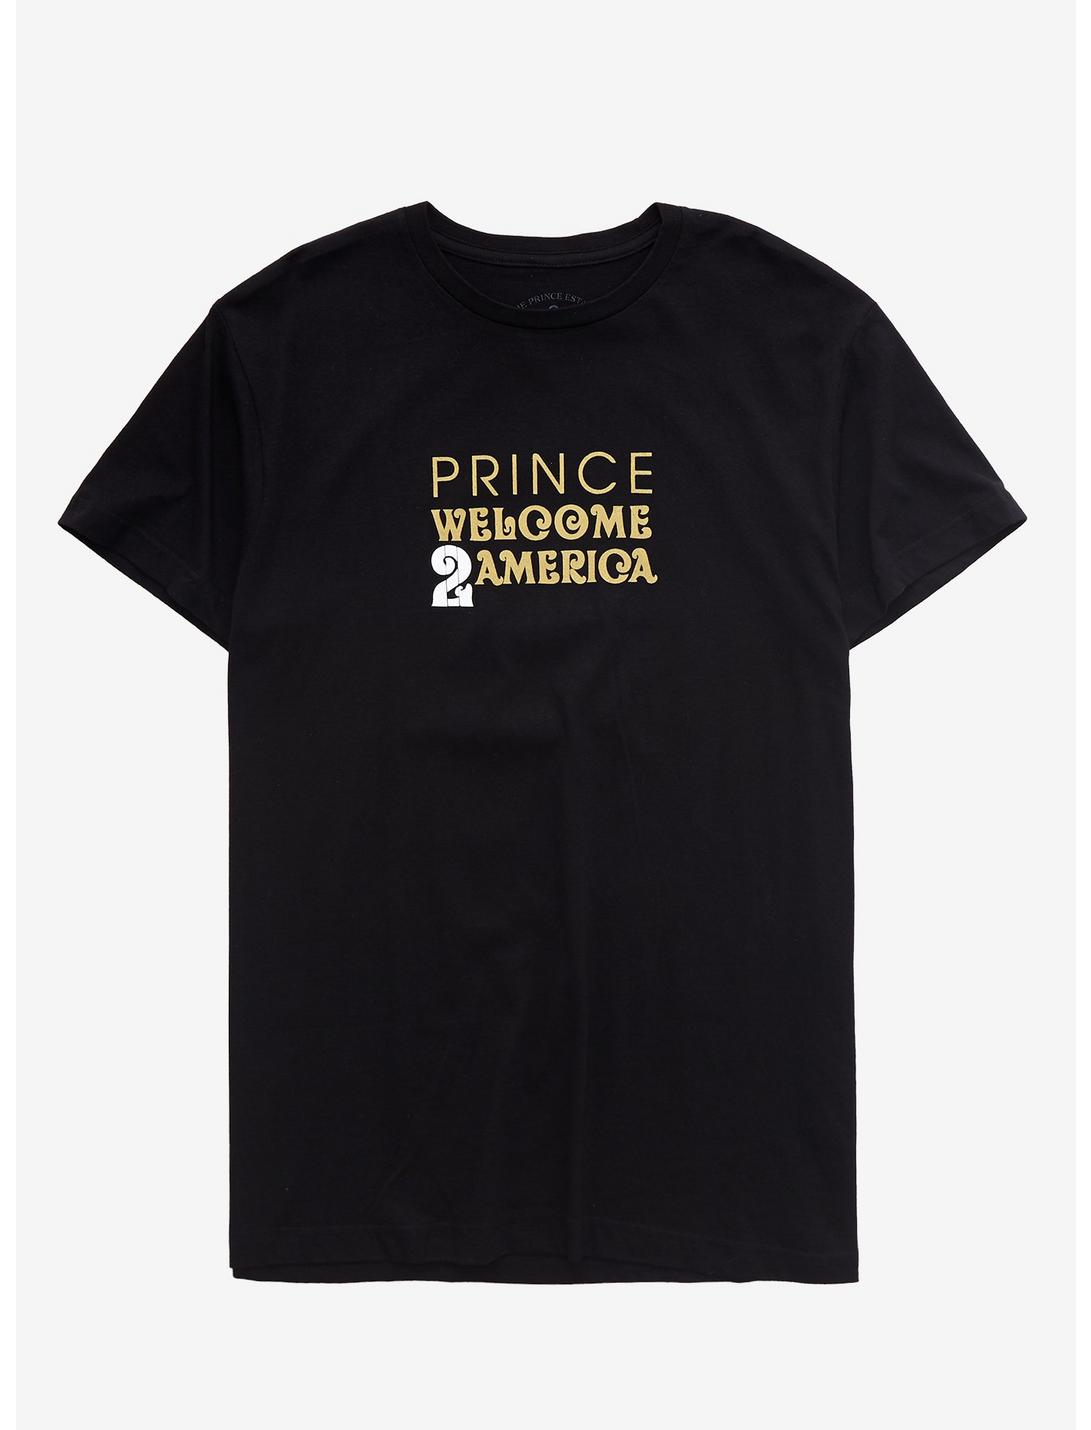 Prince Welcome 2 America T-Shirt, BRIGHT WHITE, hi-res